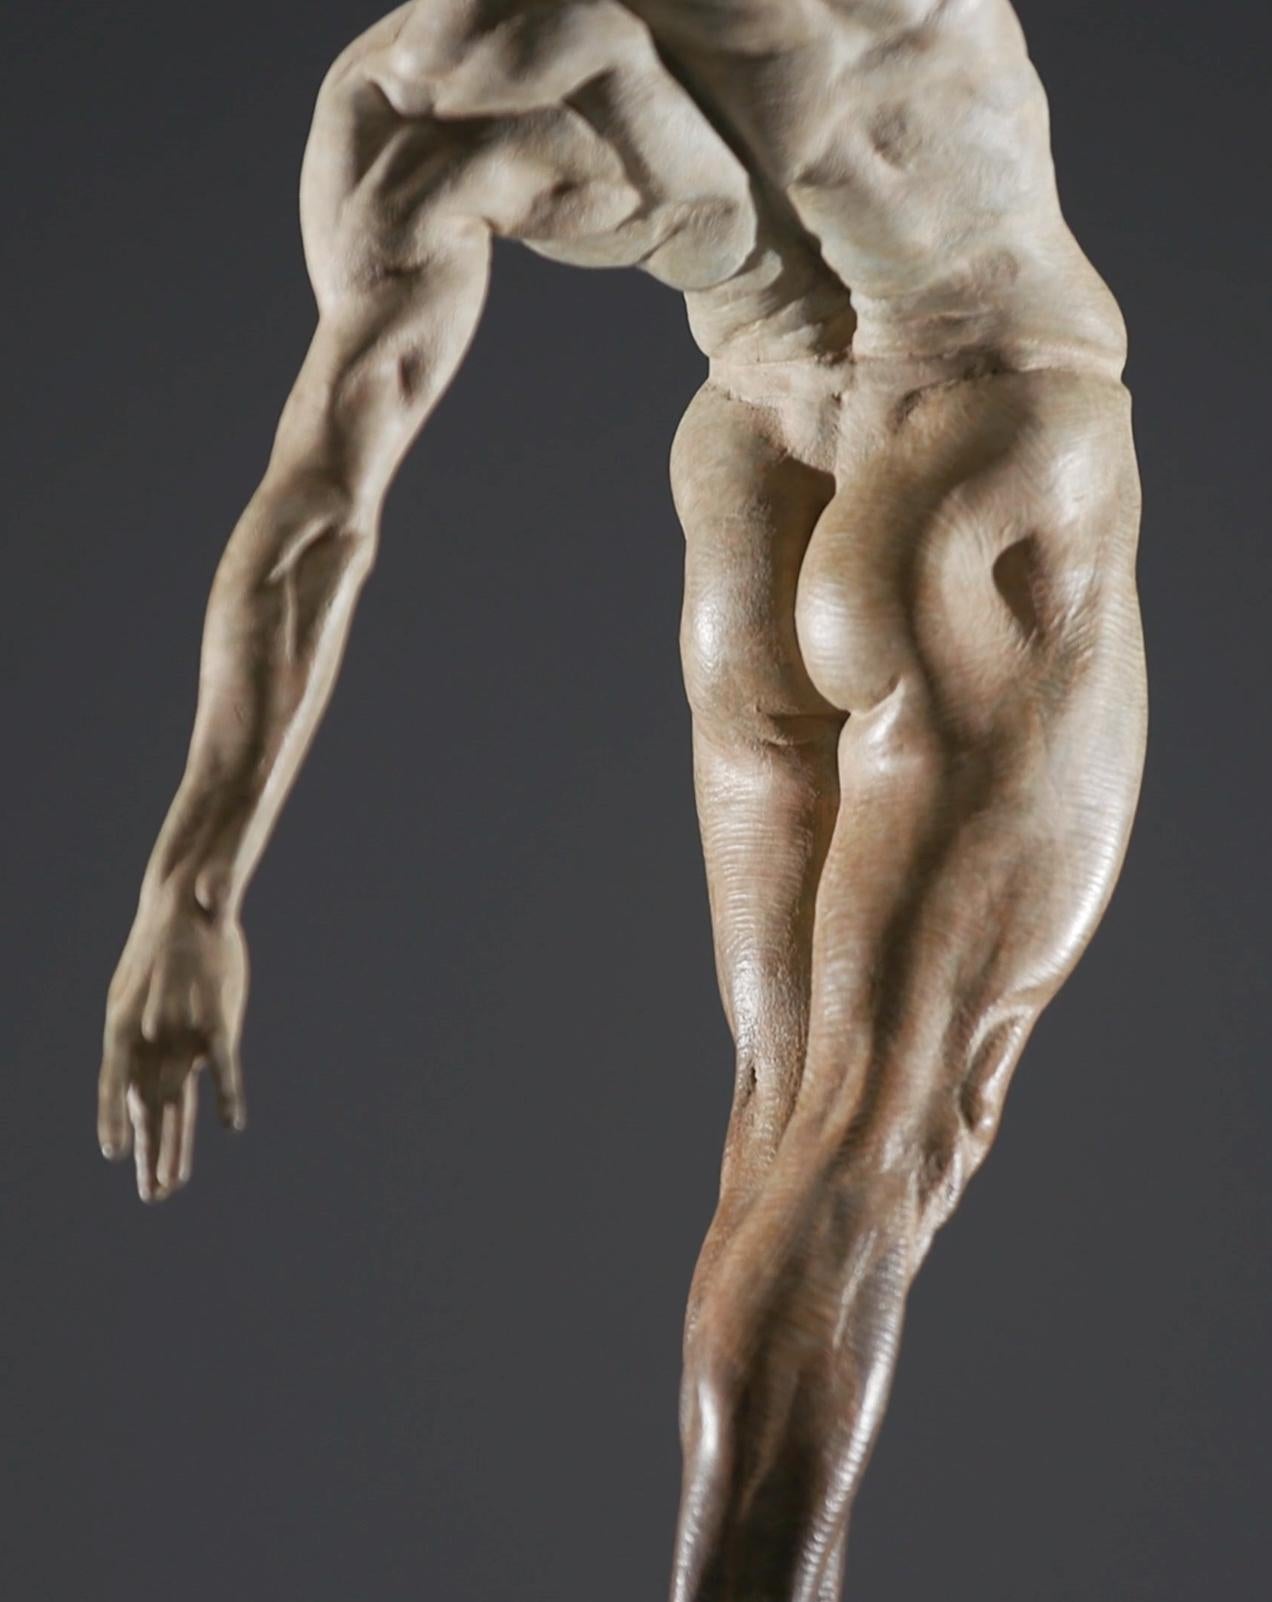 In his work entitled Allongé – to elongate or stretch - Richard MacDonald has sculpted the powerful lines of the male dancer, accentuating the graceful form of his body. Working with the Principal dancers from The Royal Ballet, MacDonald’s